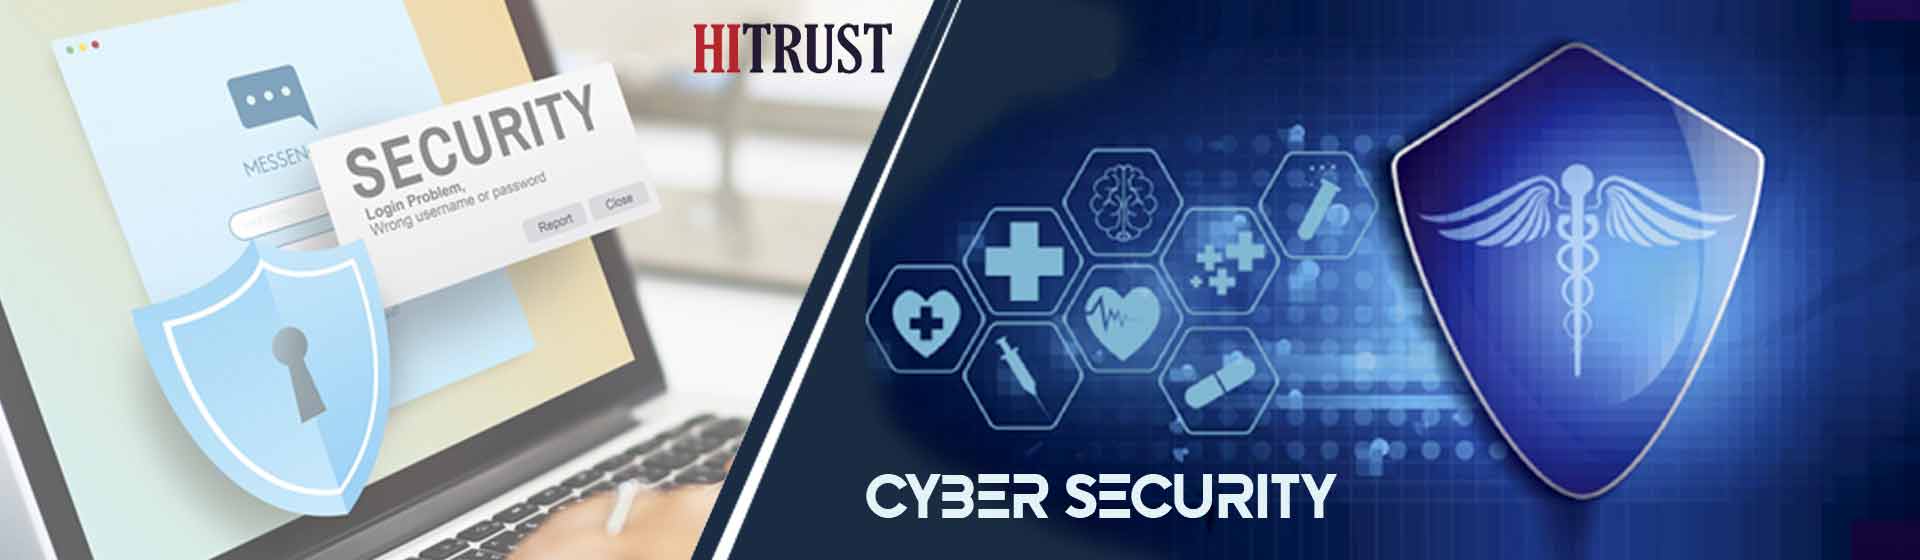 Creo Tech Solutions is one of the Top Cyber Security Consultant and Software Application Development Solution Company in India & US – Provides Cyber Security - Software Application Developers - App development